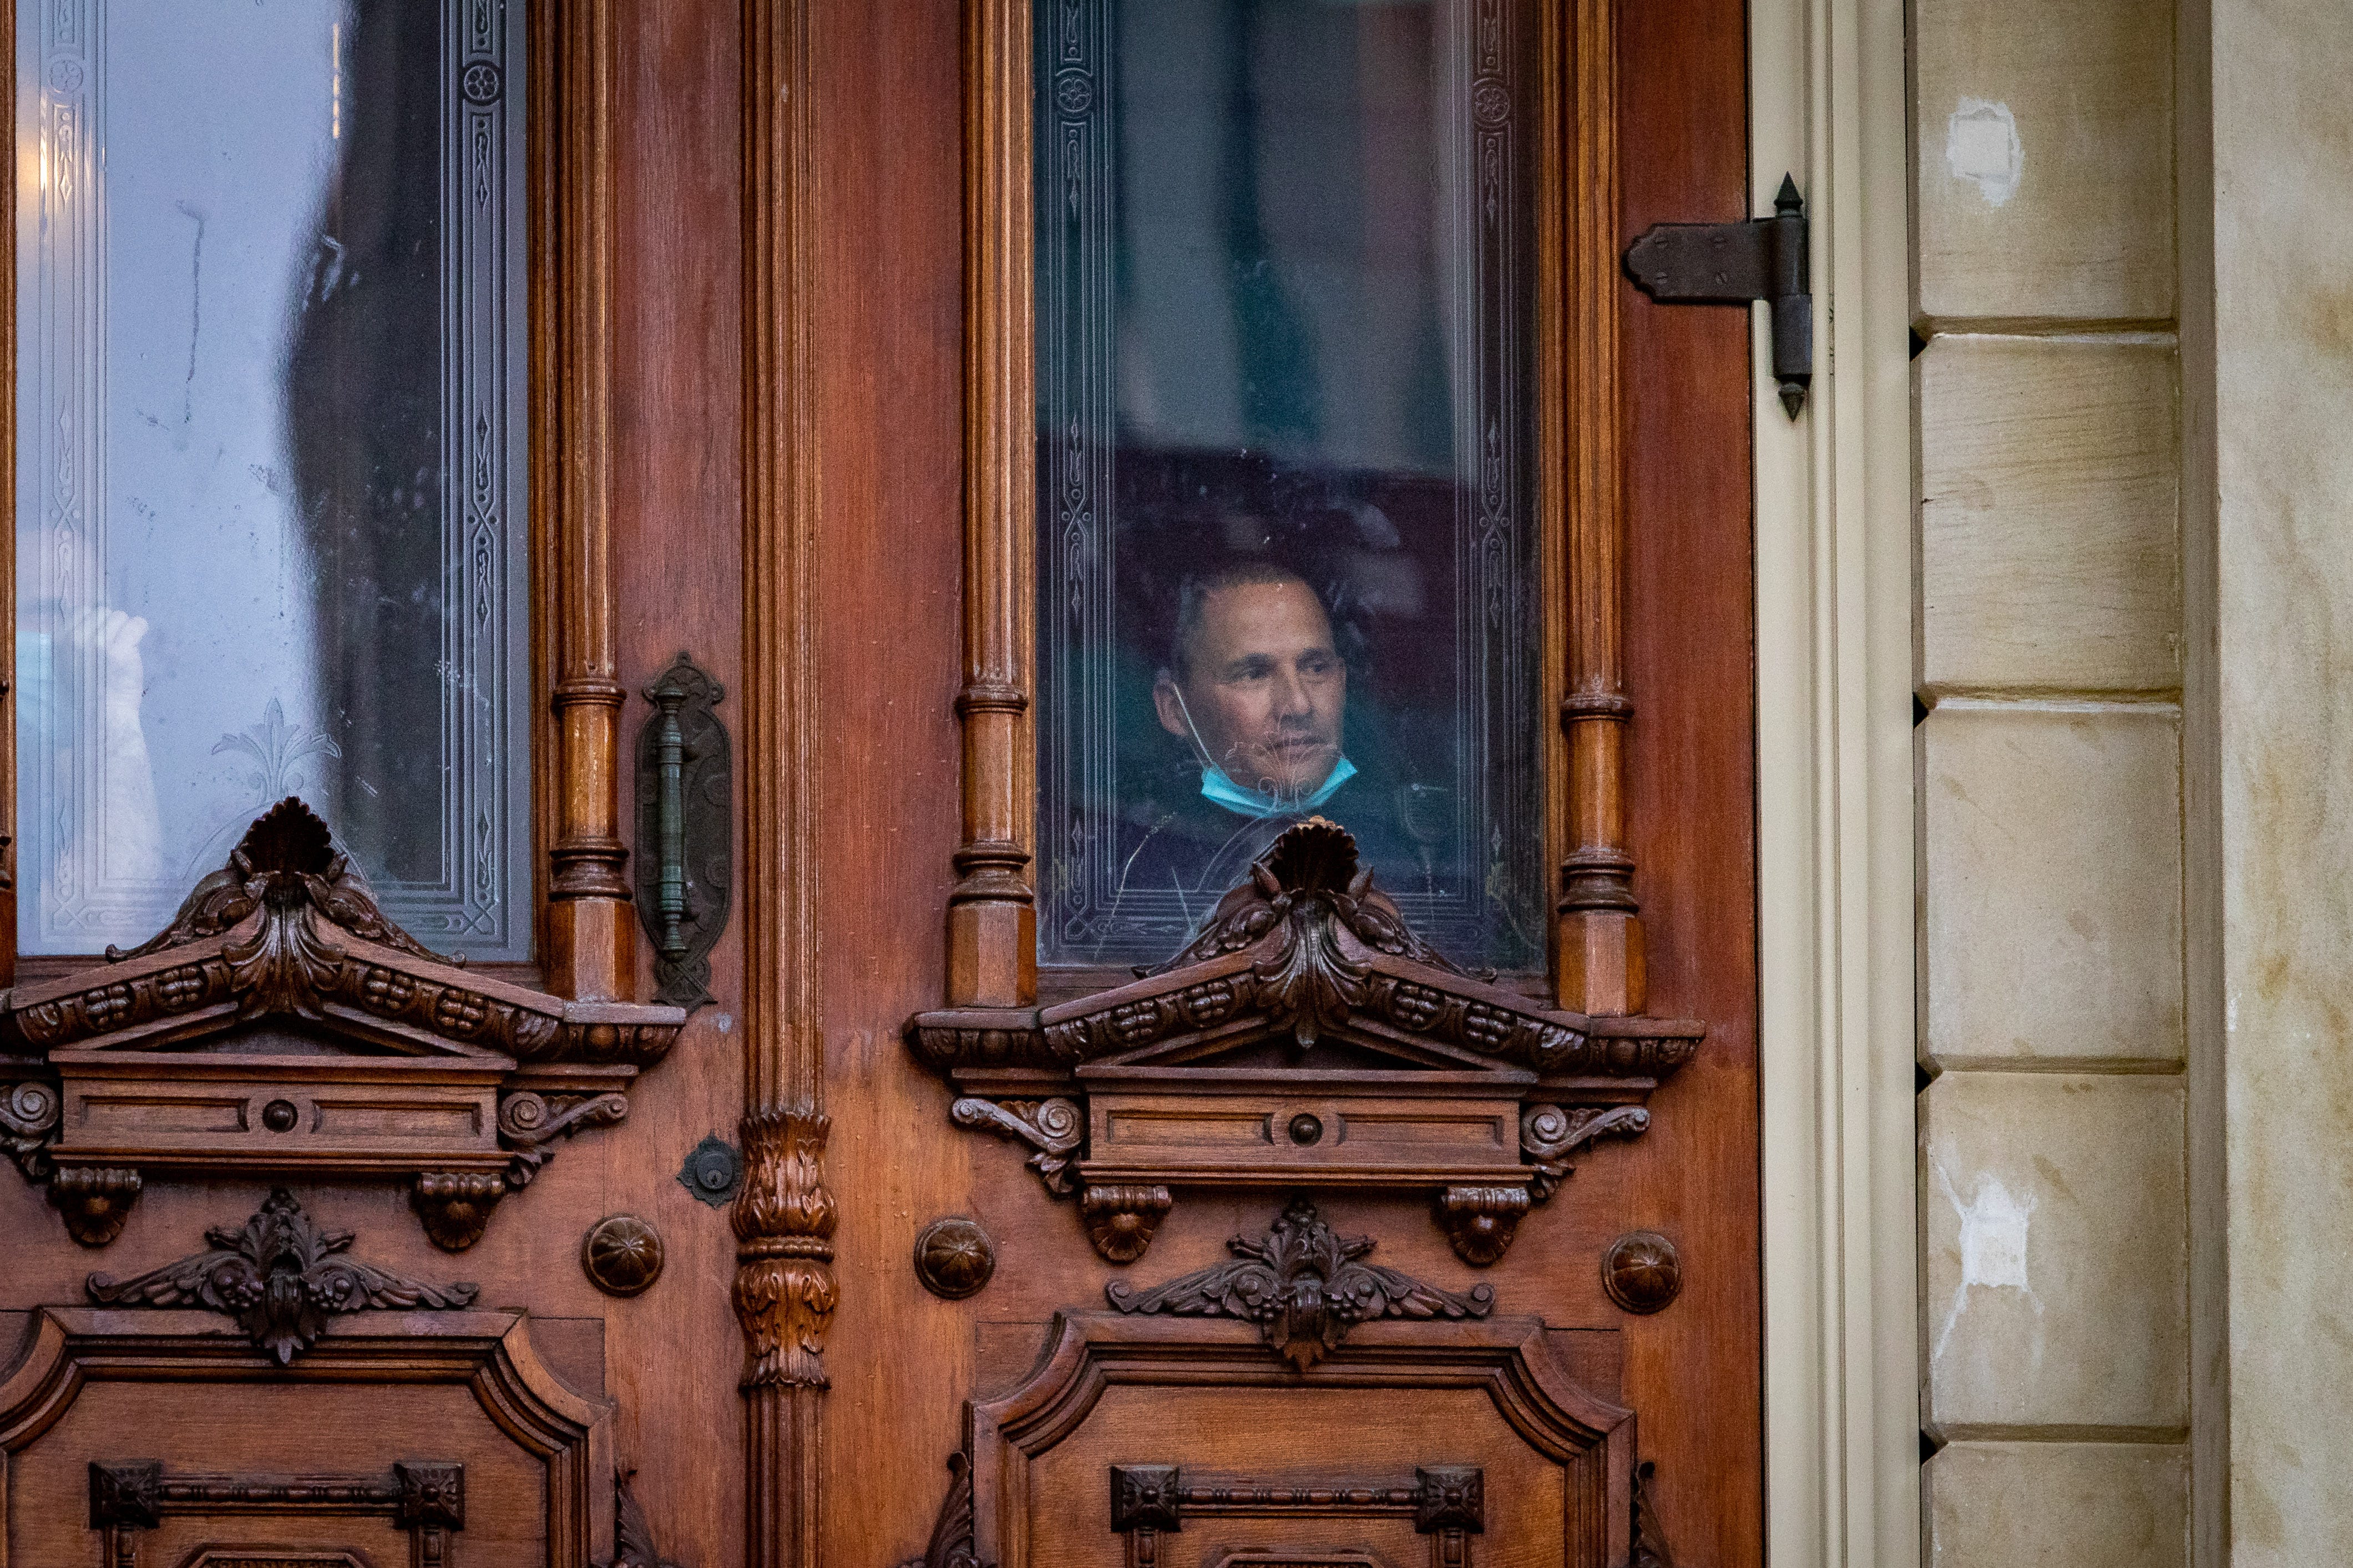 A Michigan State Police officer peers out from inside the capital building at protestors outside.